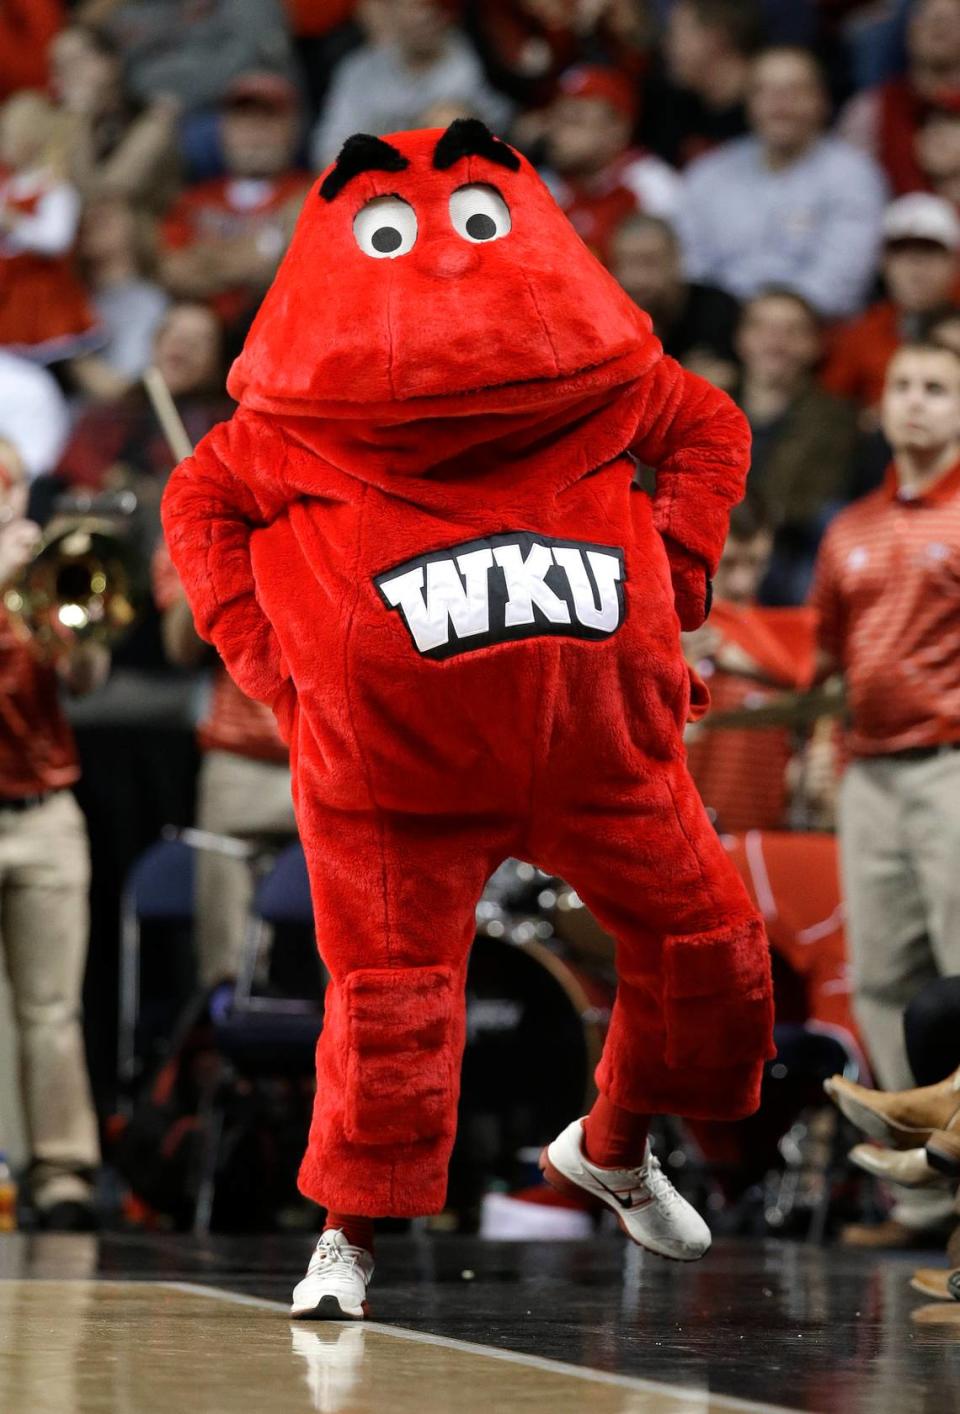 Western Kentucky University Athletics was profoundly impacted by the conference realignment aftershocks that followed the announcements by Oklahoma and Texas in 2021 that they were moving to the SEC.